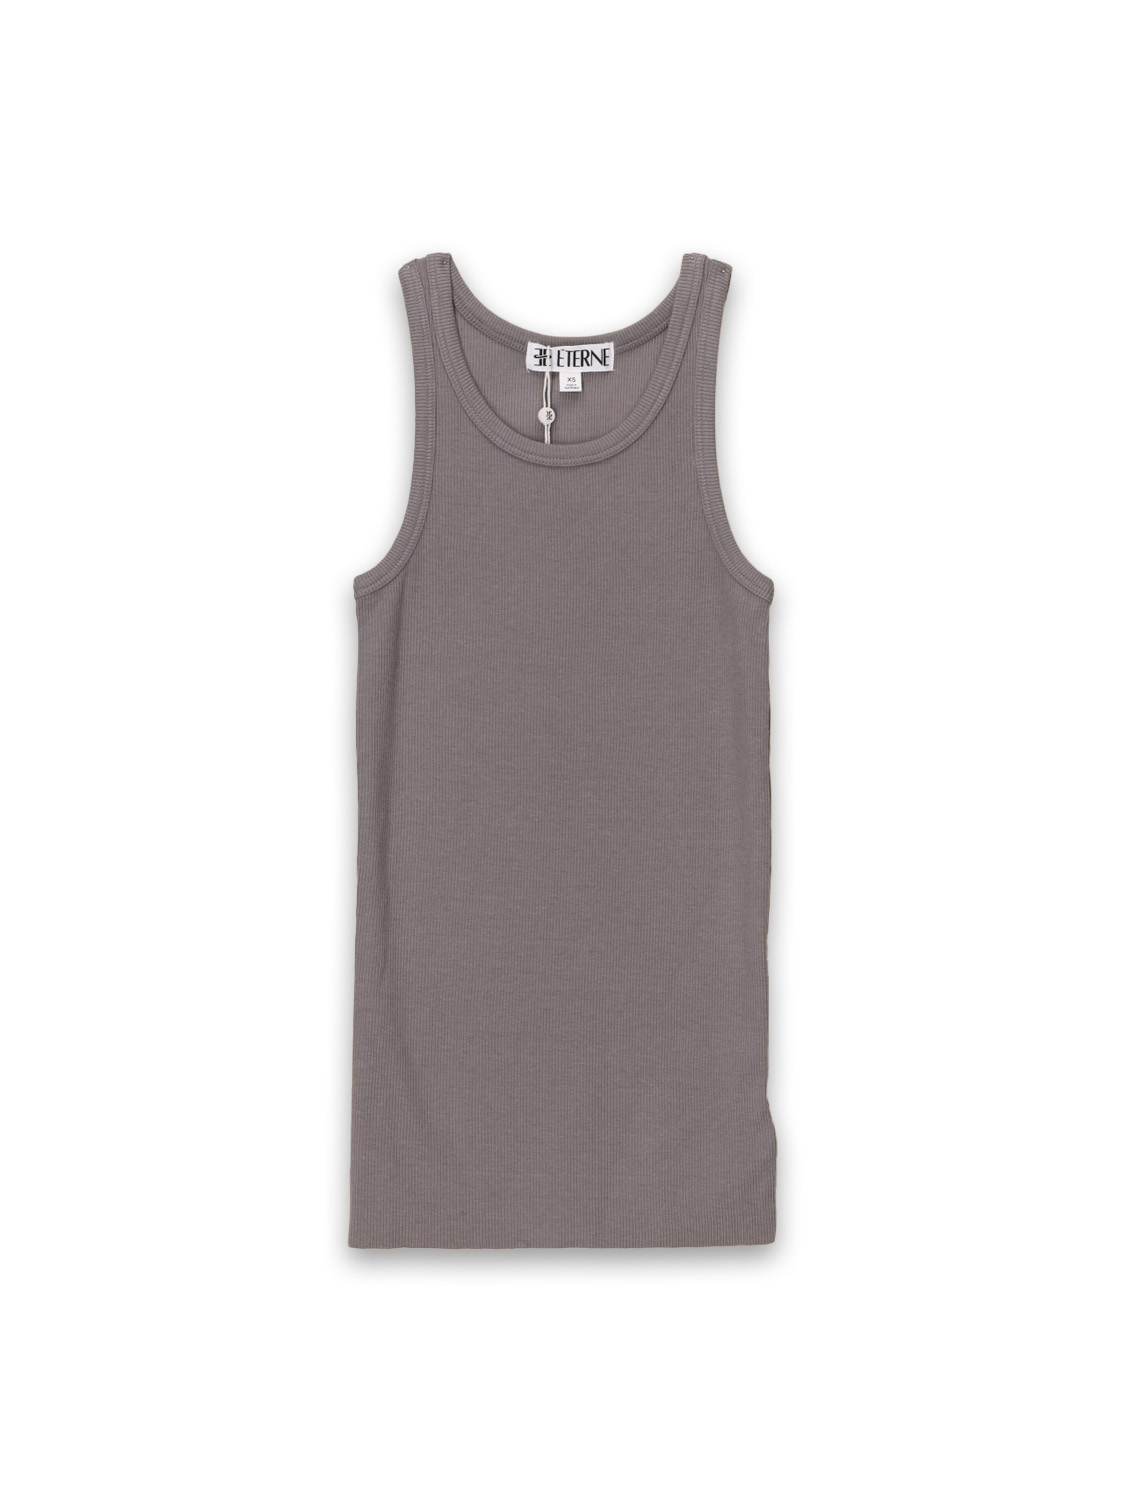 Rib-knit tank top made from a cotton blend 